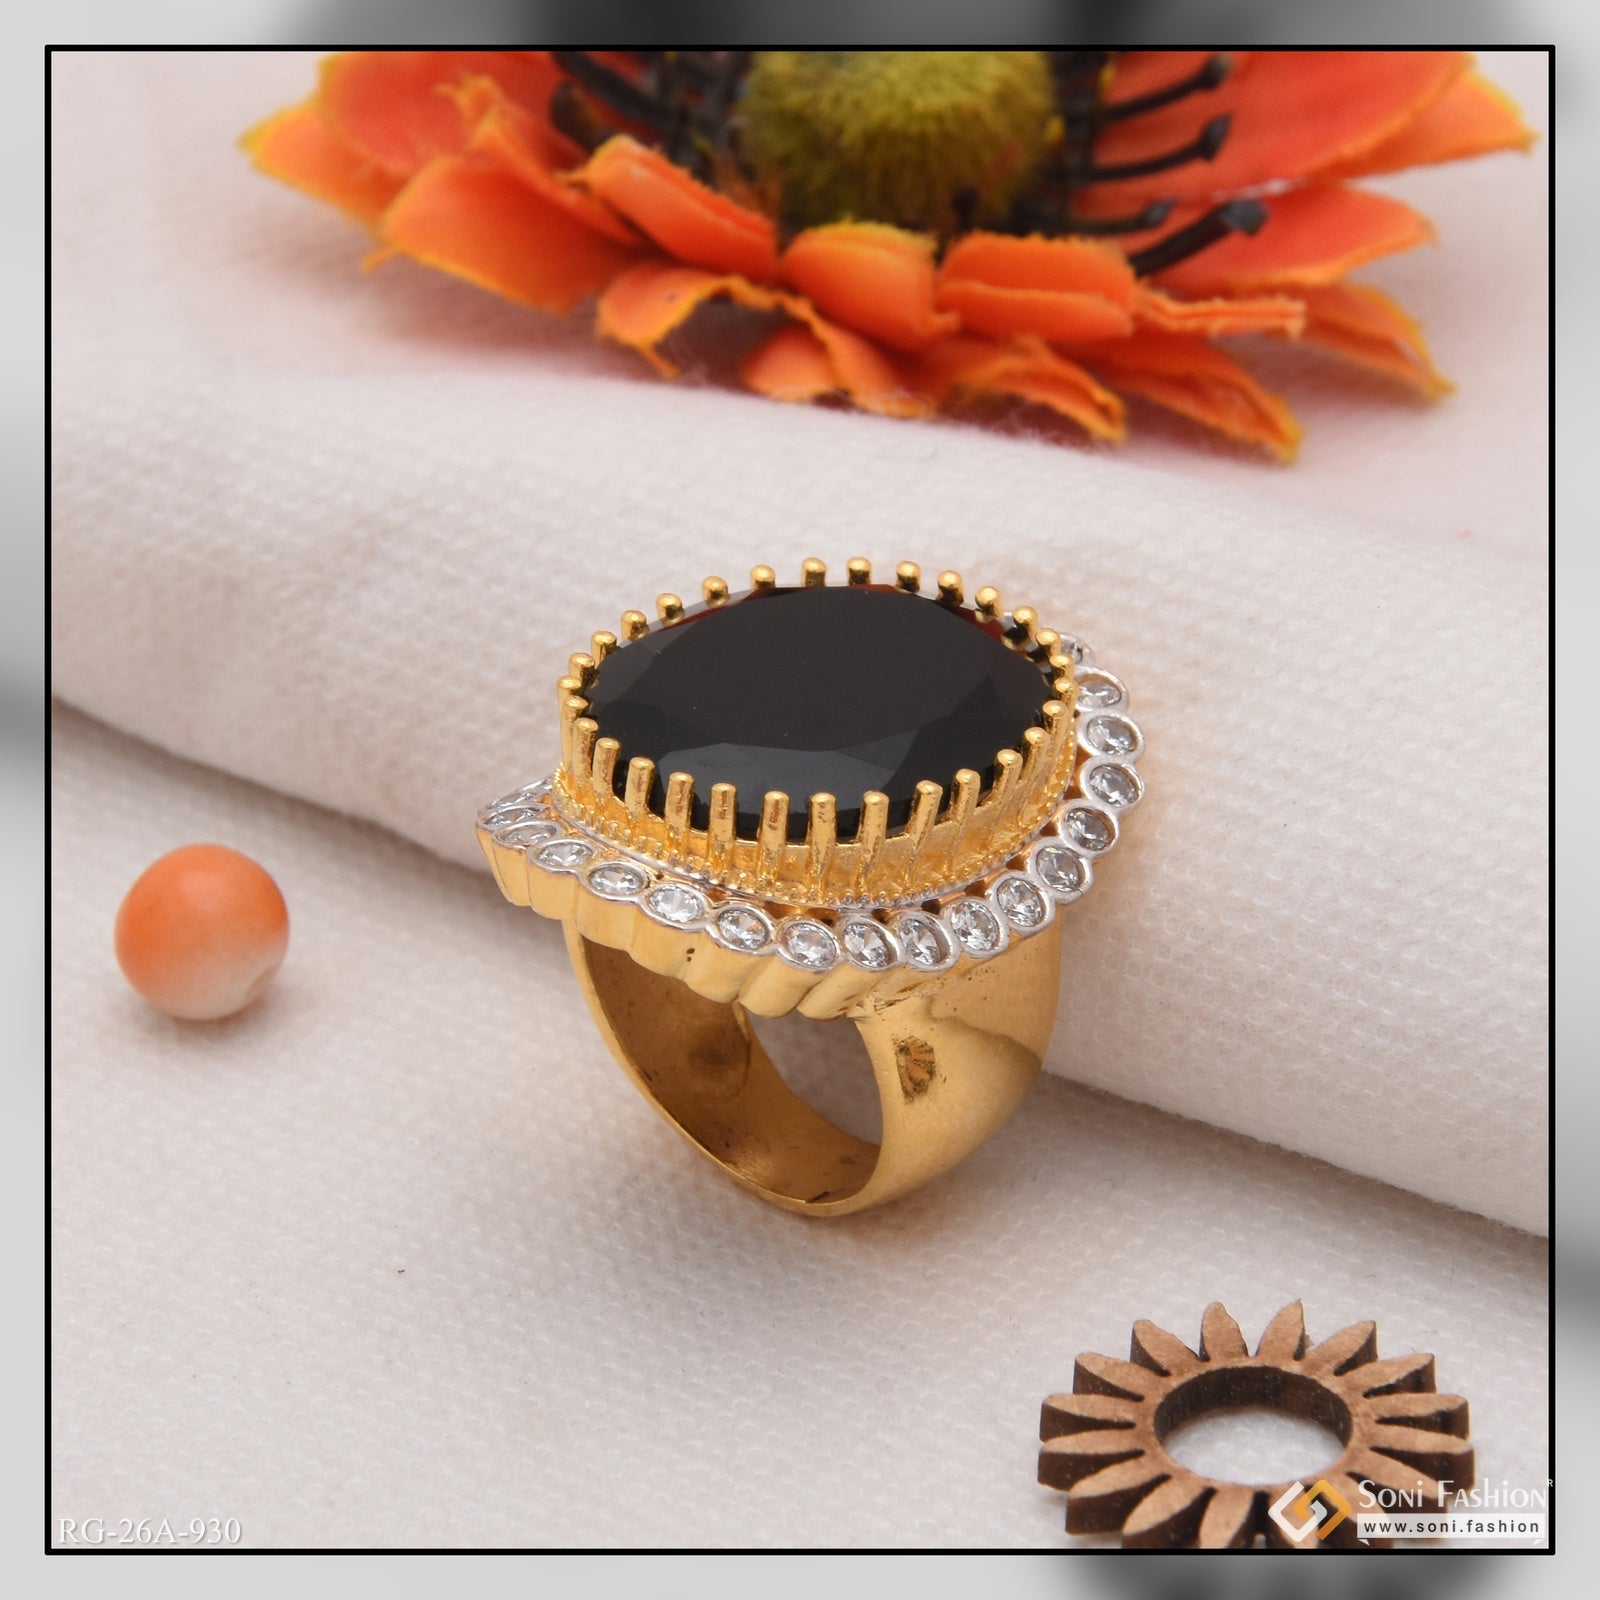 1 Gram Gold Forming Black Stone with Diamond Fashionable Design Ring - Style A930